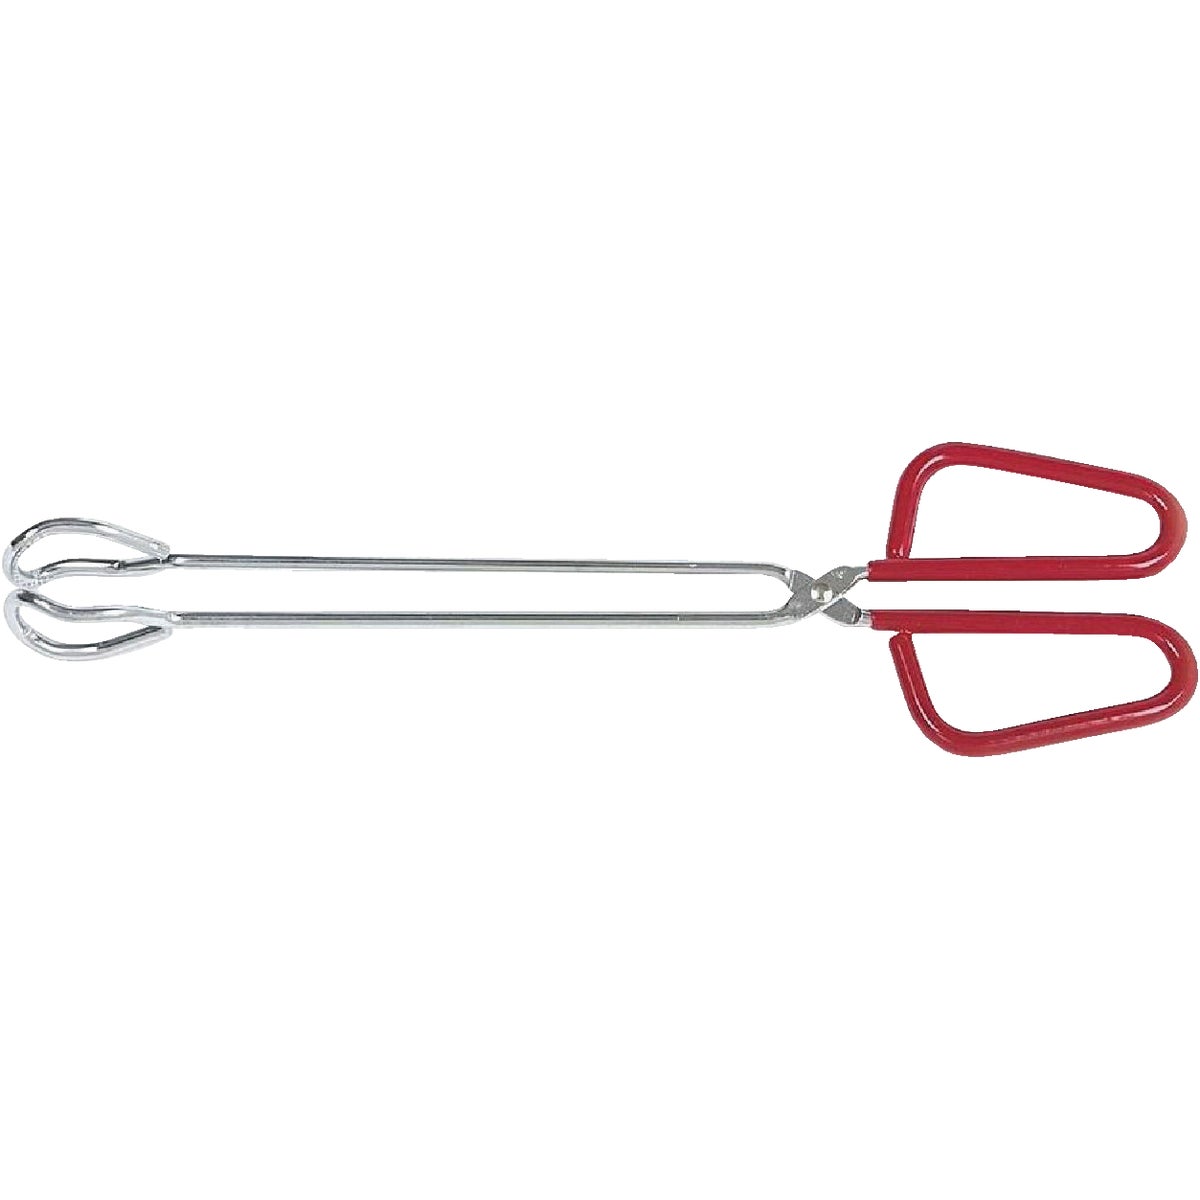 Item 604215, 12 In. long with heat-resistant serving tongs with red handles.